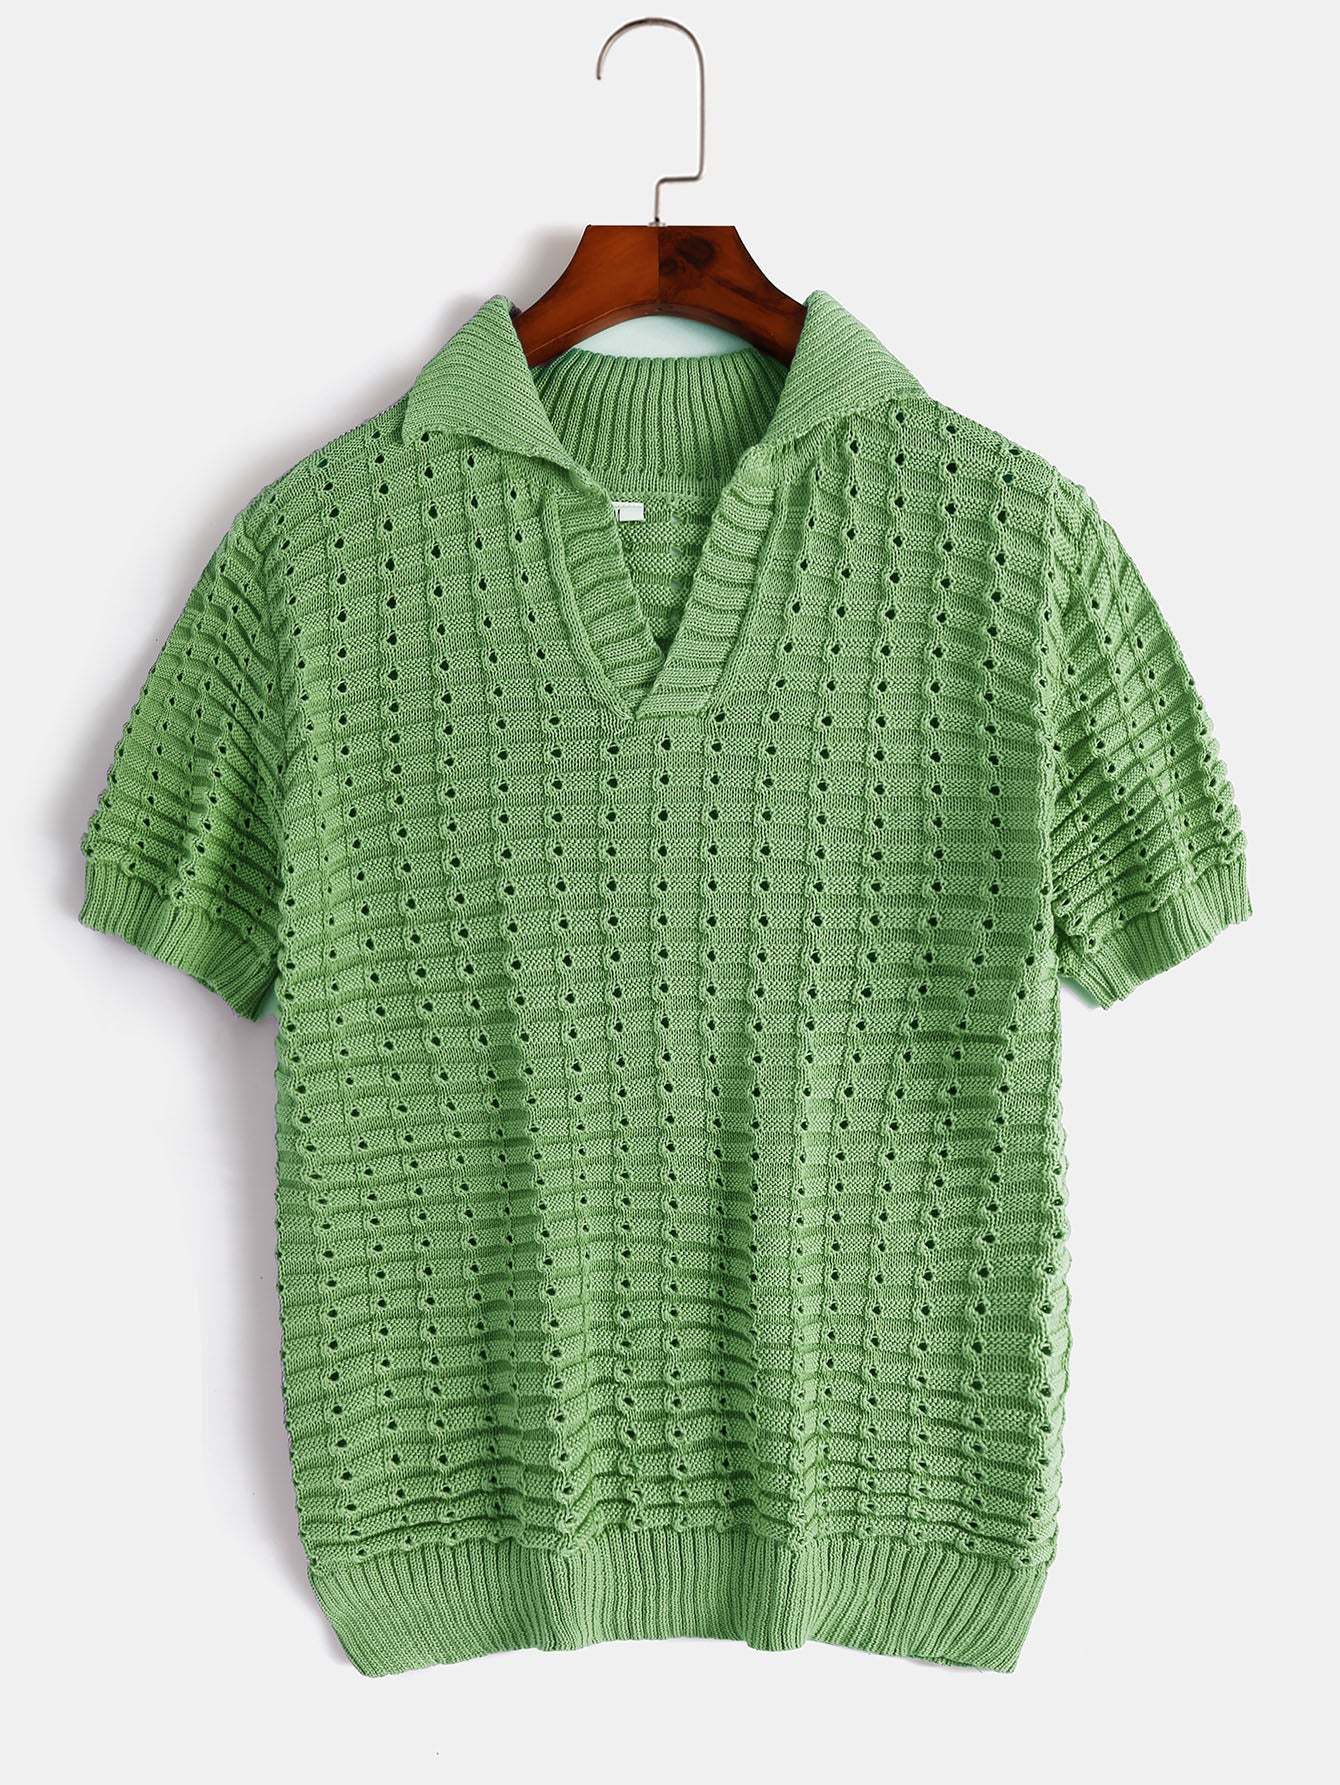 Lightweight Sweater Knitted Short-Sleeved Casual Polo Shirt